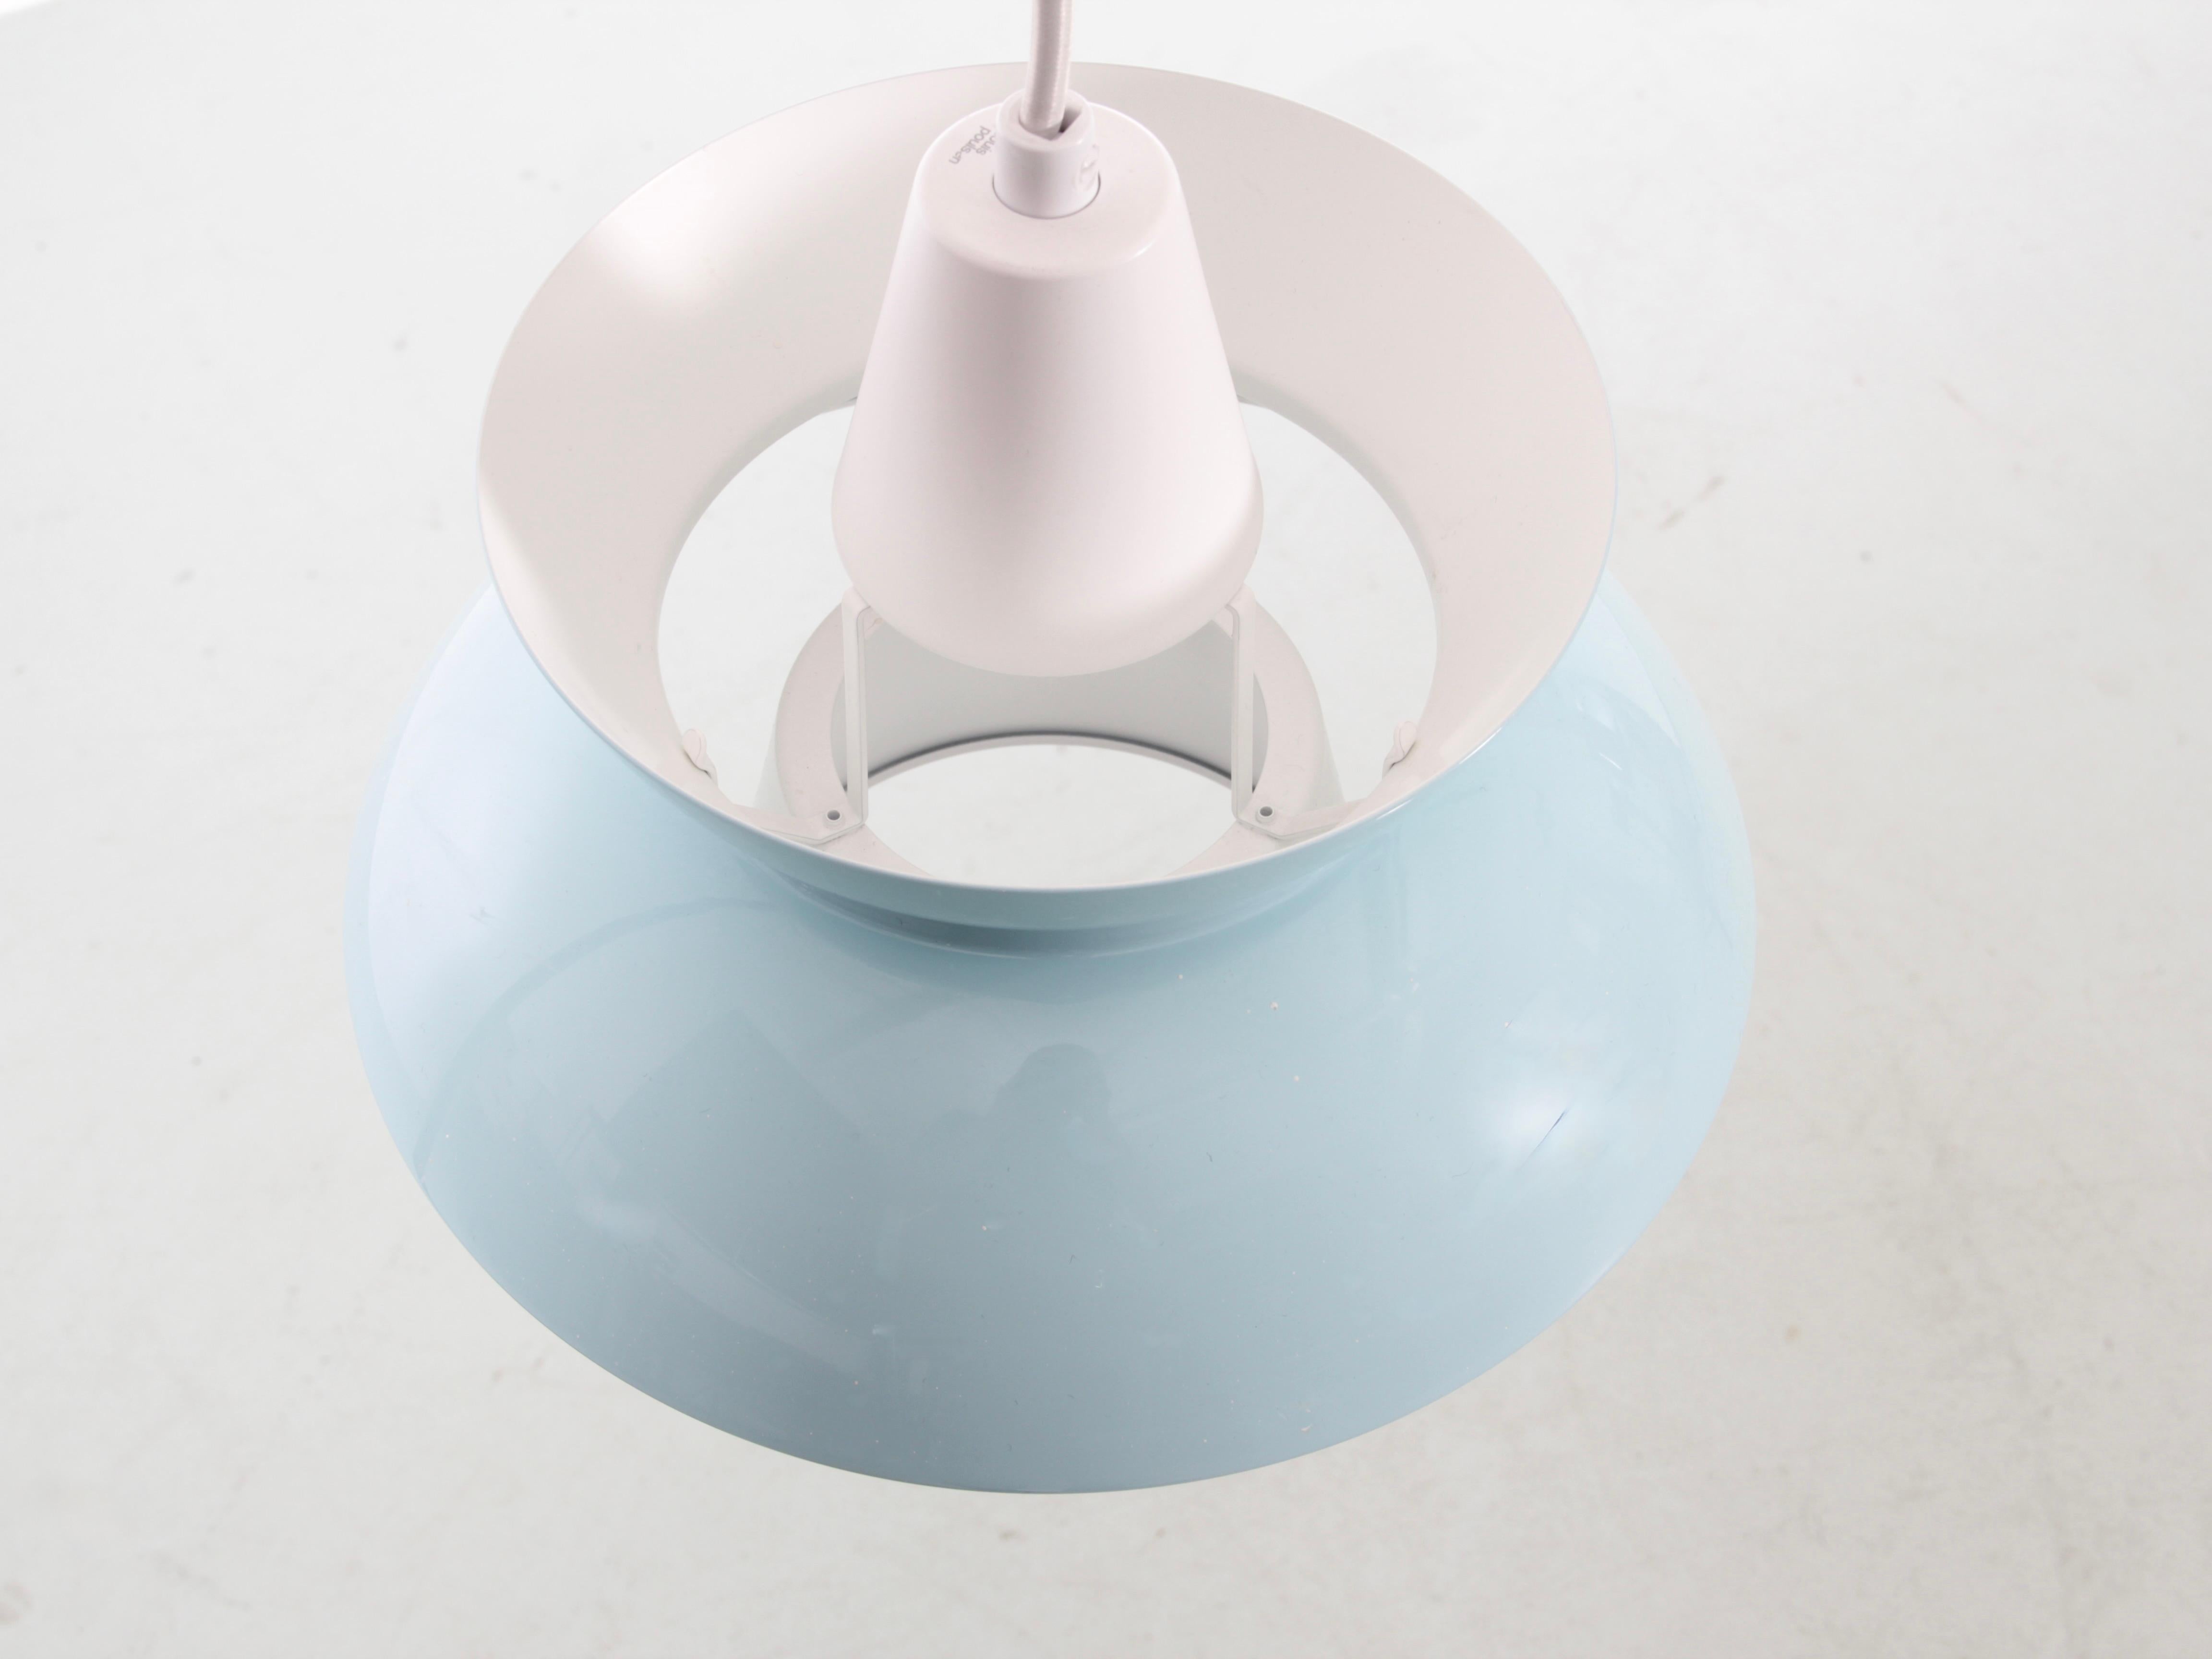 Mid-Century Modern Scandinavian pendant lamp Doo-Wop light blue by Louis Poulsen. Edition from 2010. This color is not produced anymore.